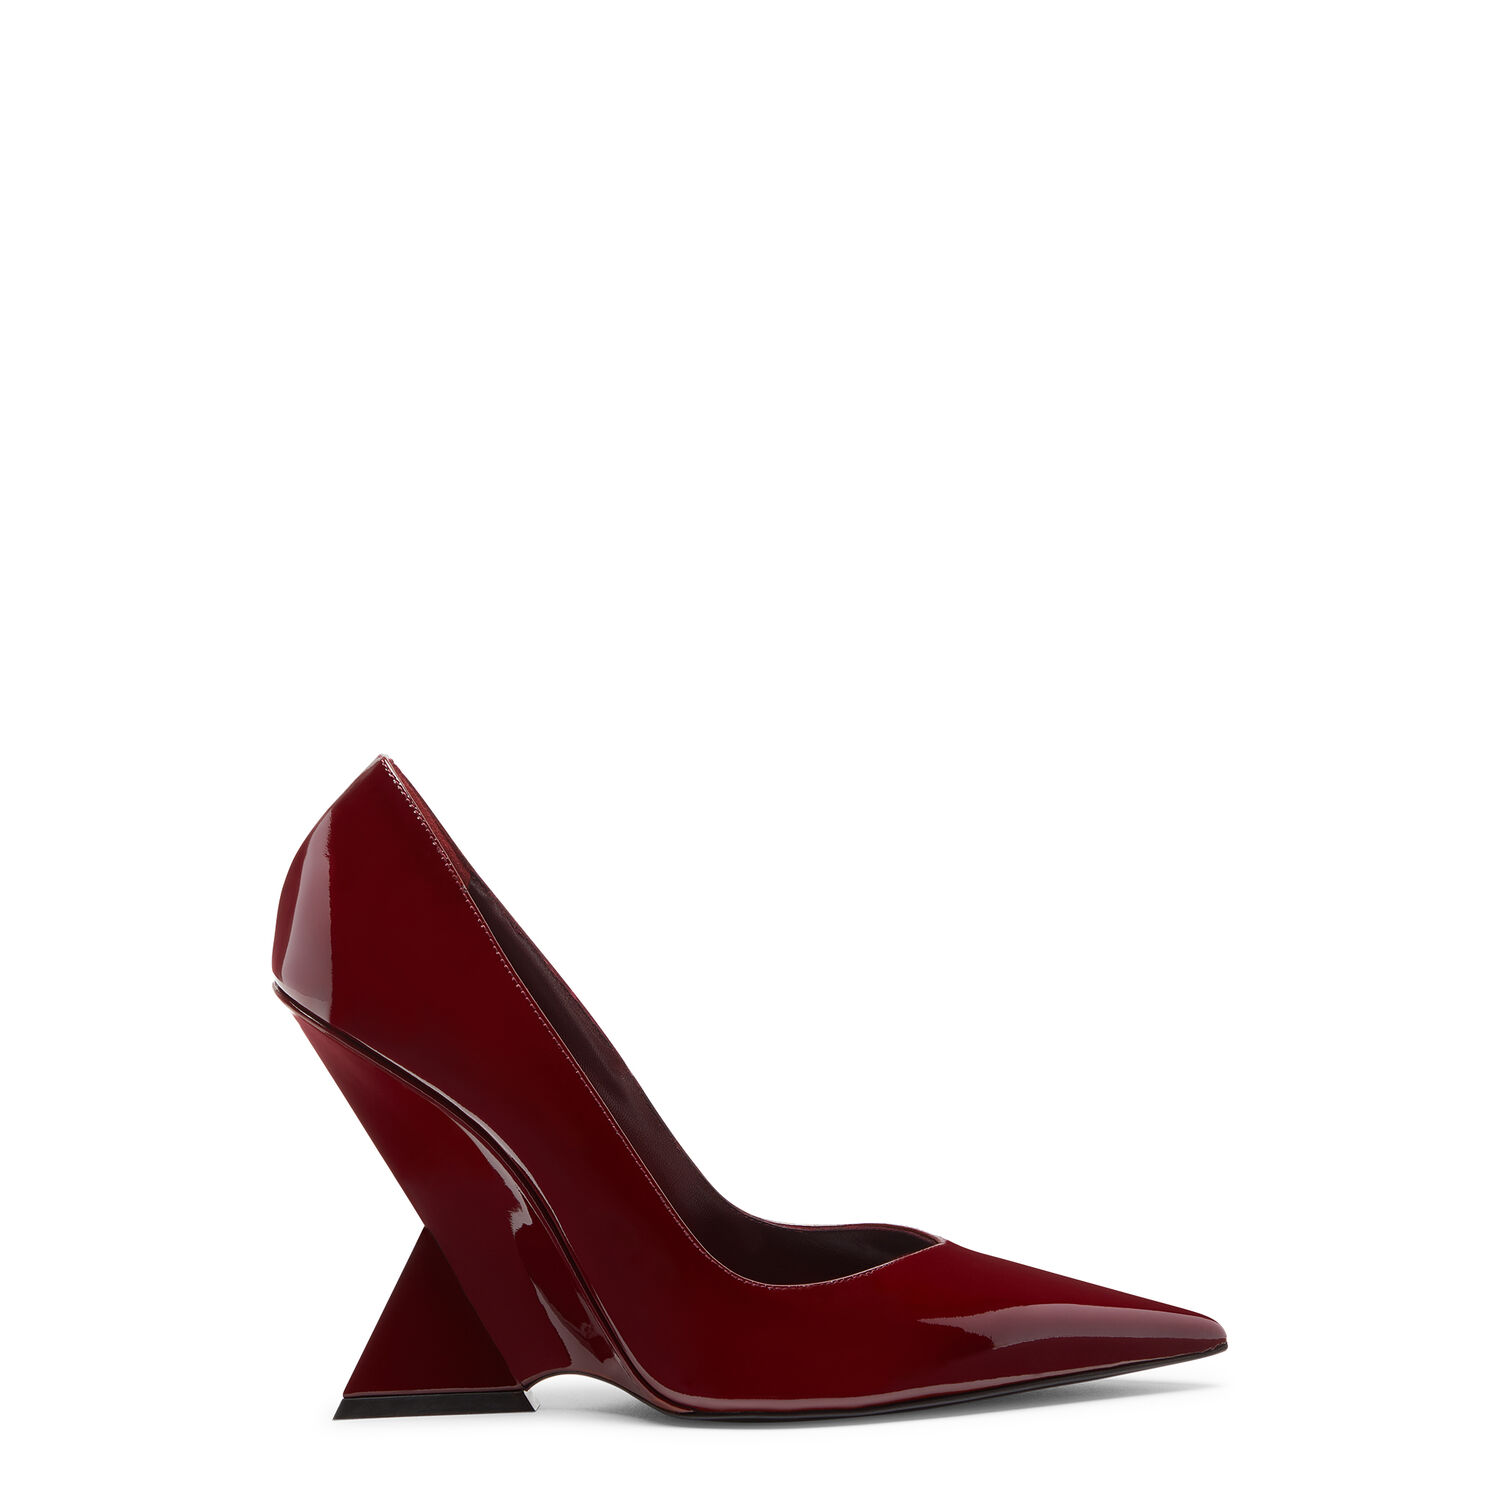 Cheope'' wine red pump for Women